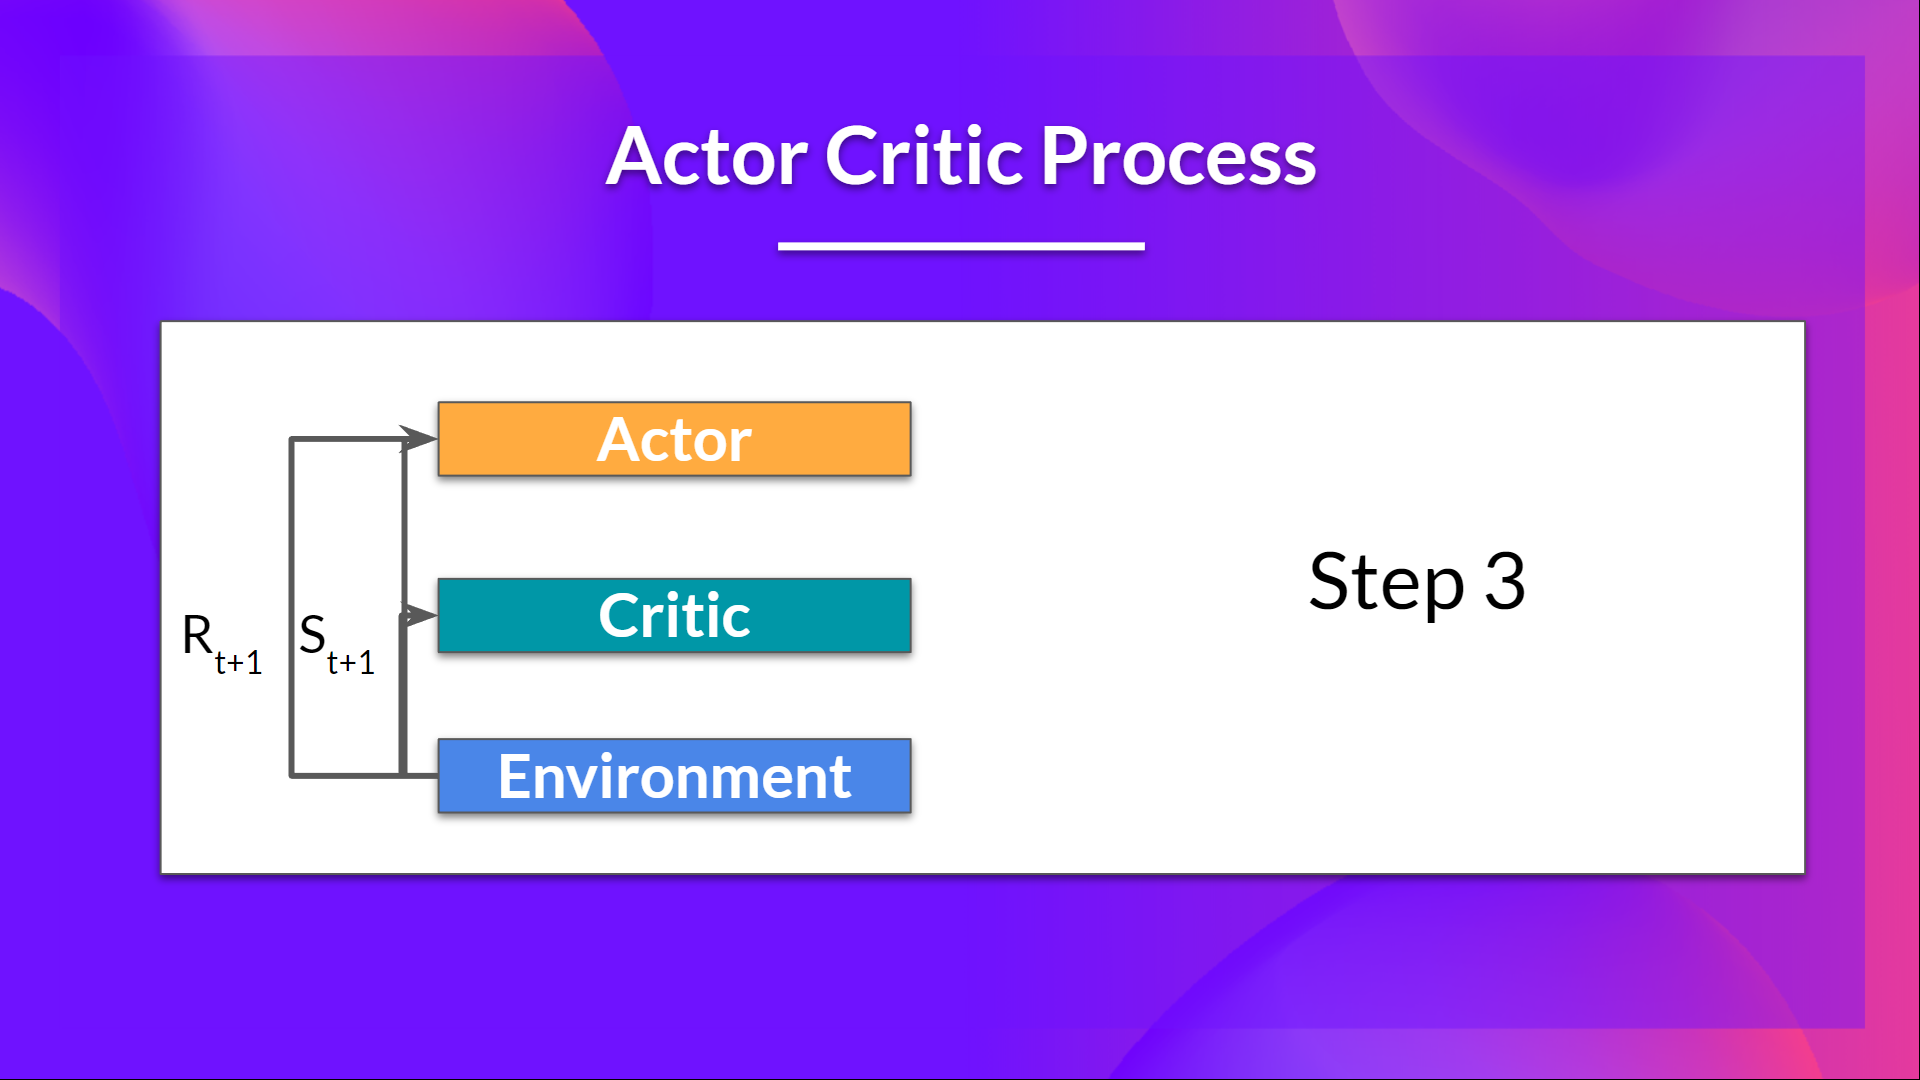 Step 3 Actor Critic